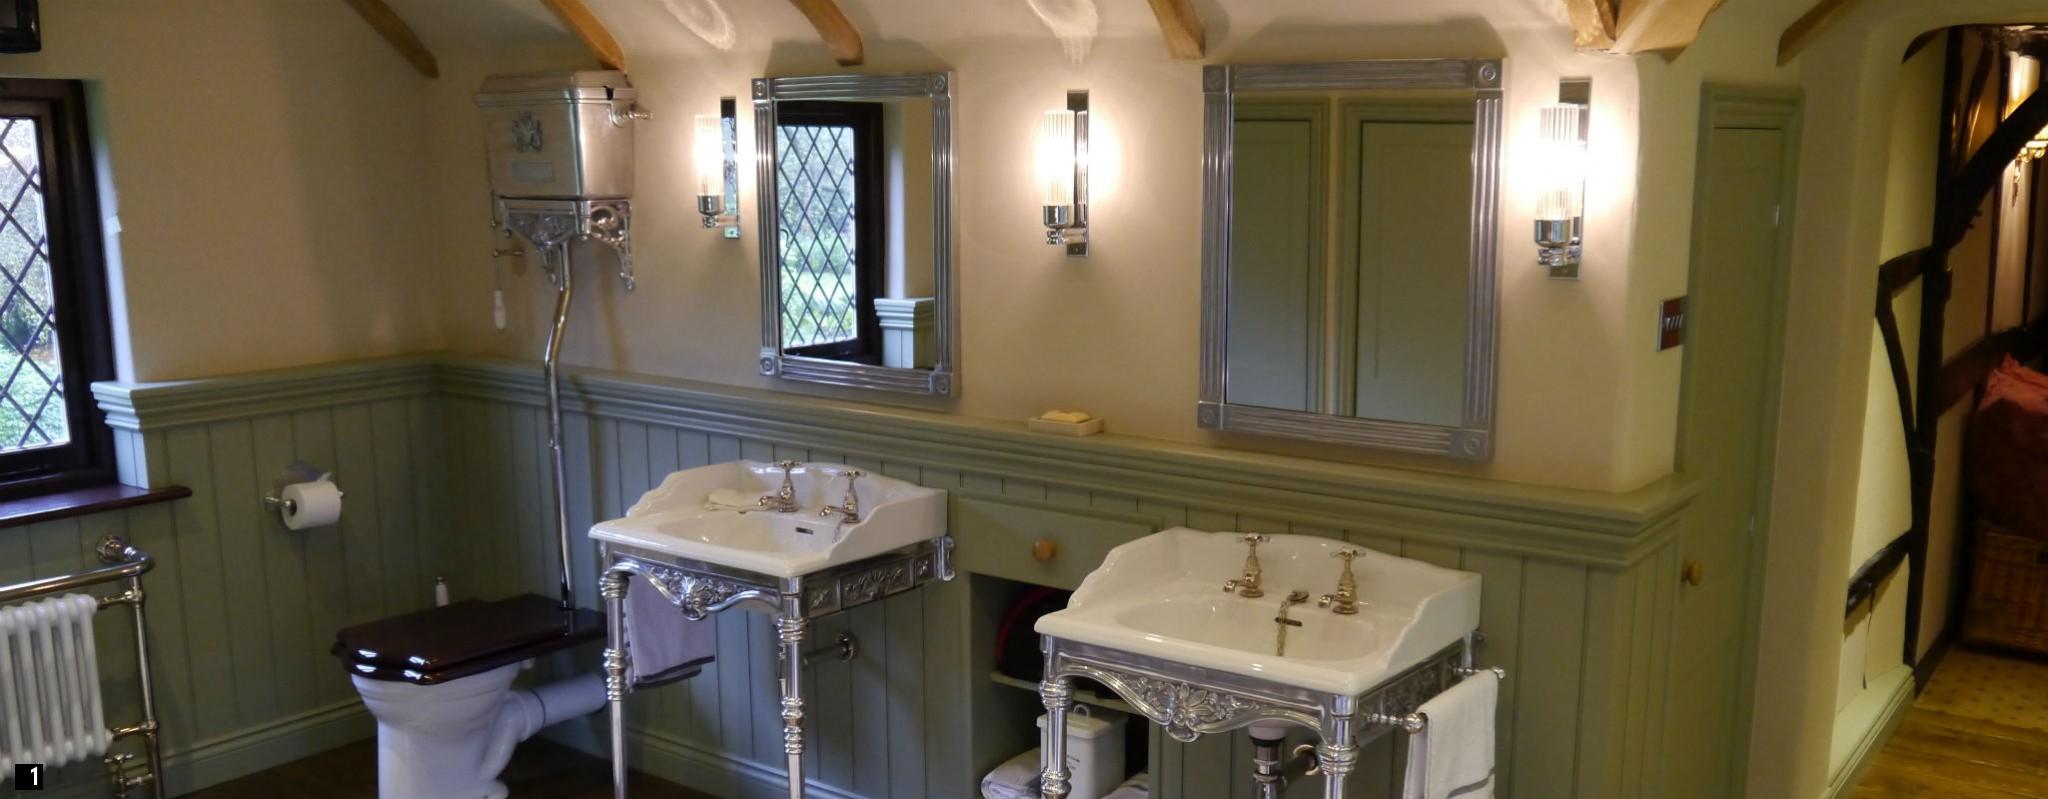 His and Her Classic Chadder Basins + Polished Metal Washstands, Nickel Fittings